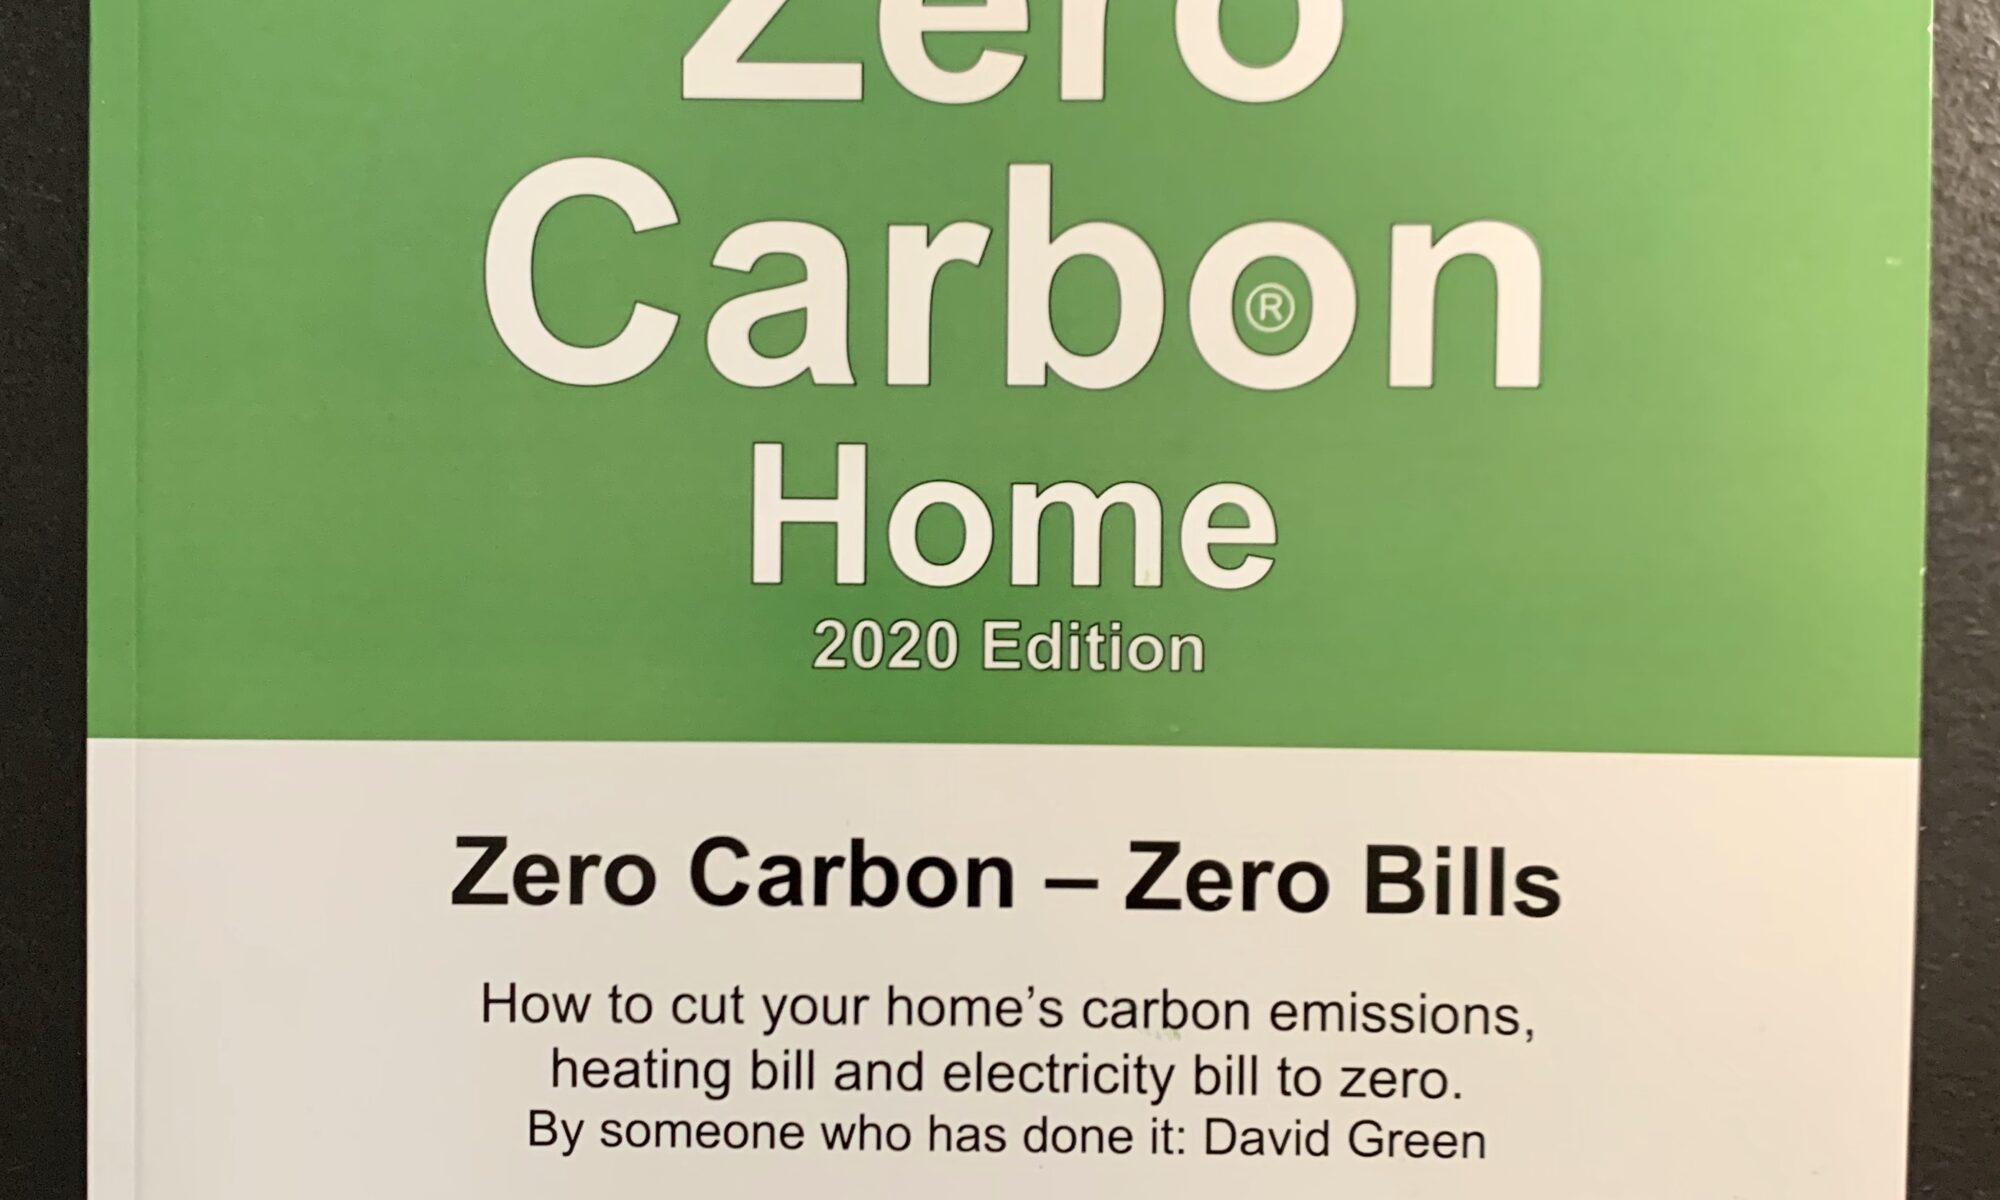 Book energy efficiency Zero Carbon Home 2020 edition from cover